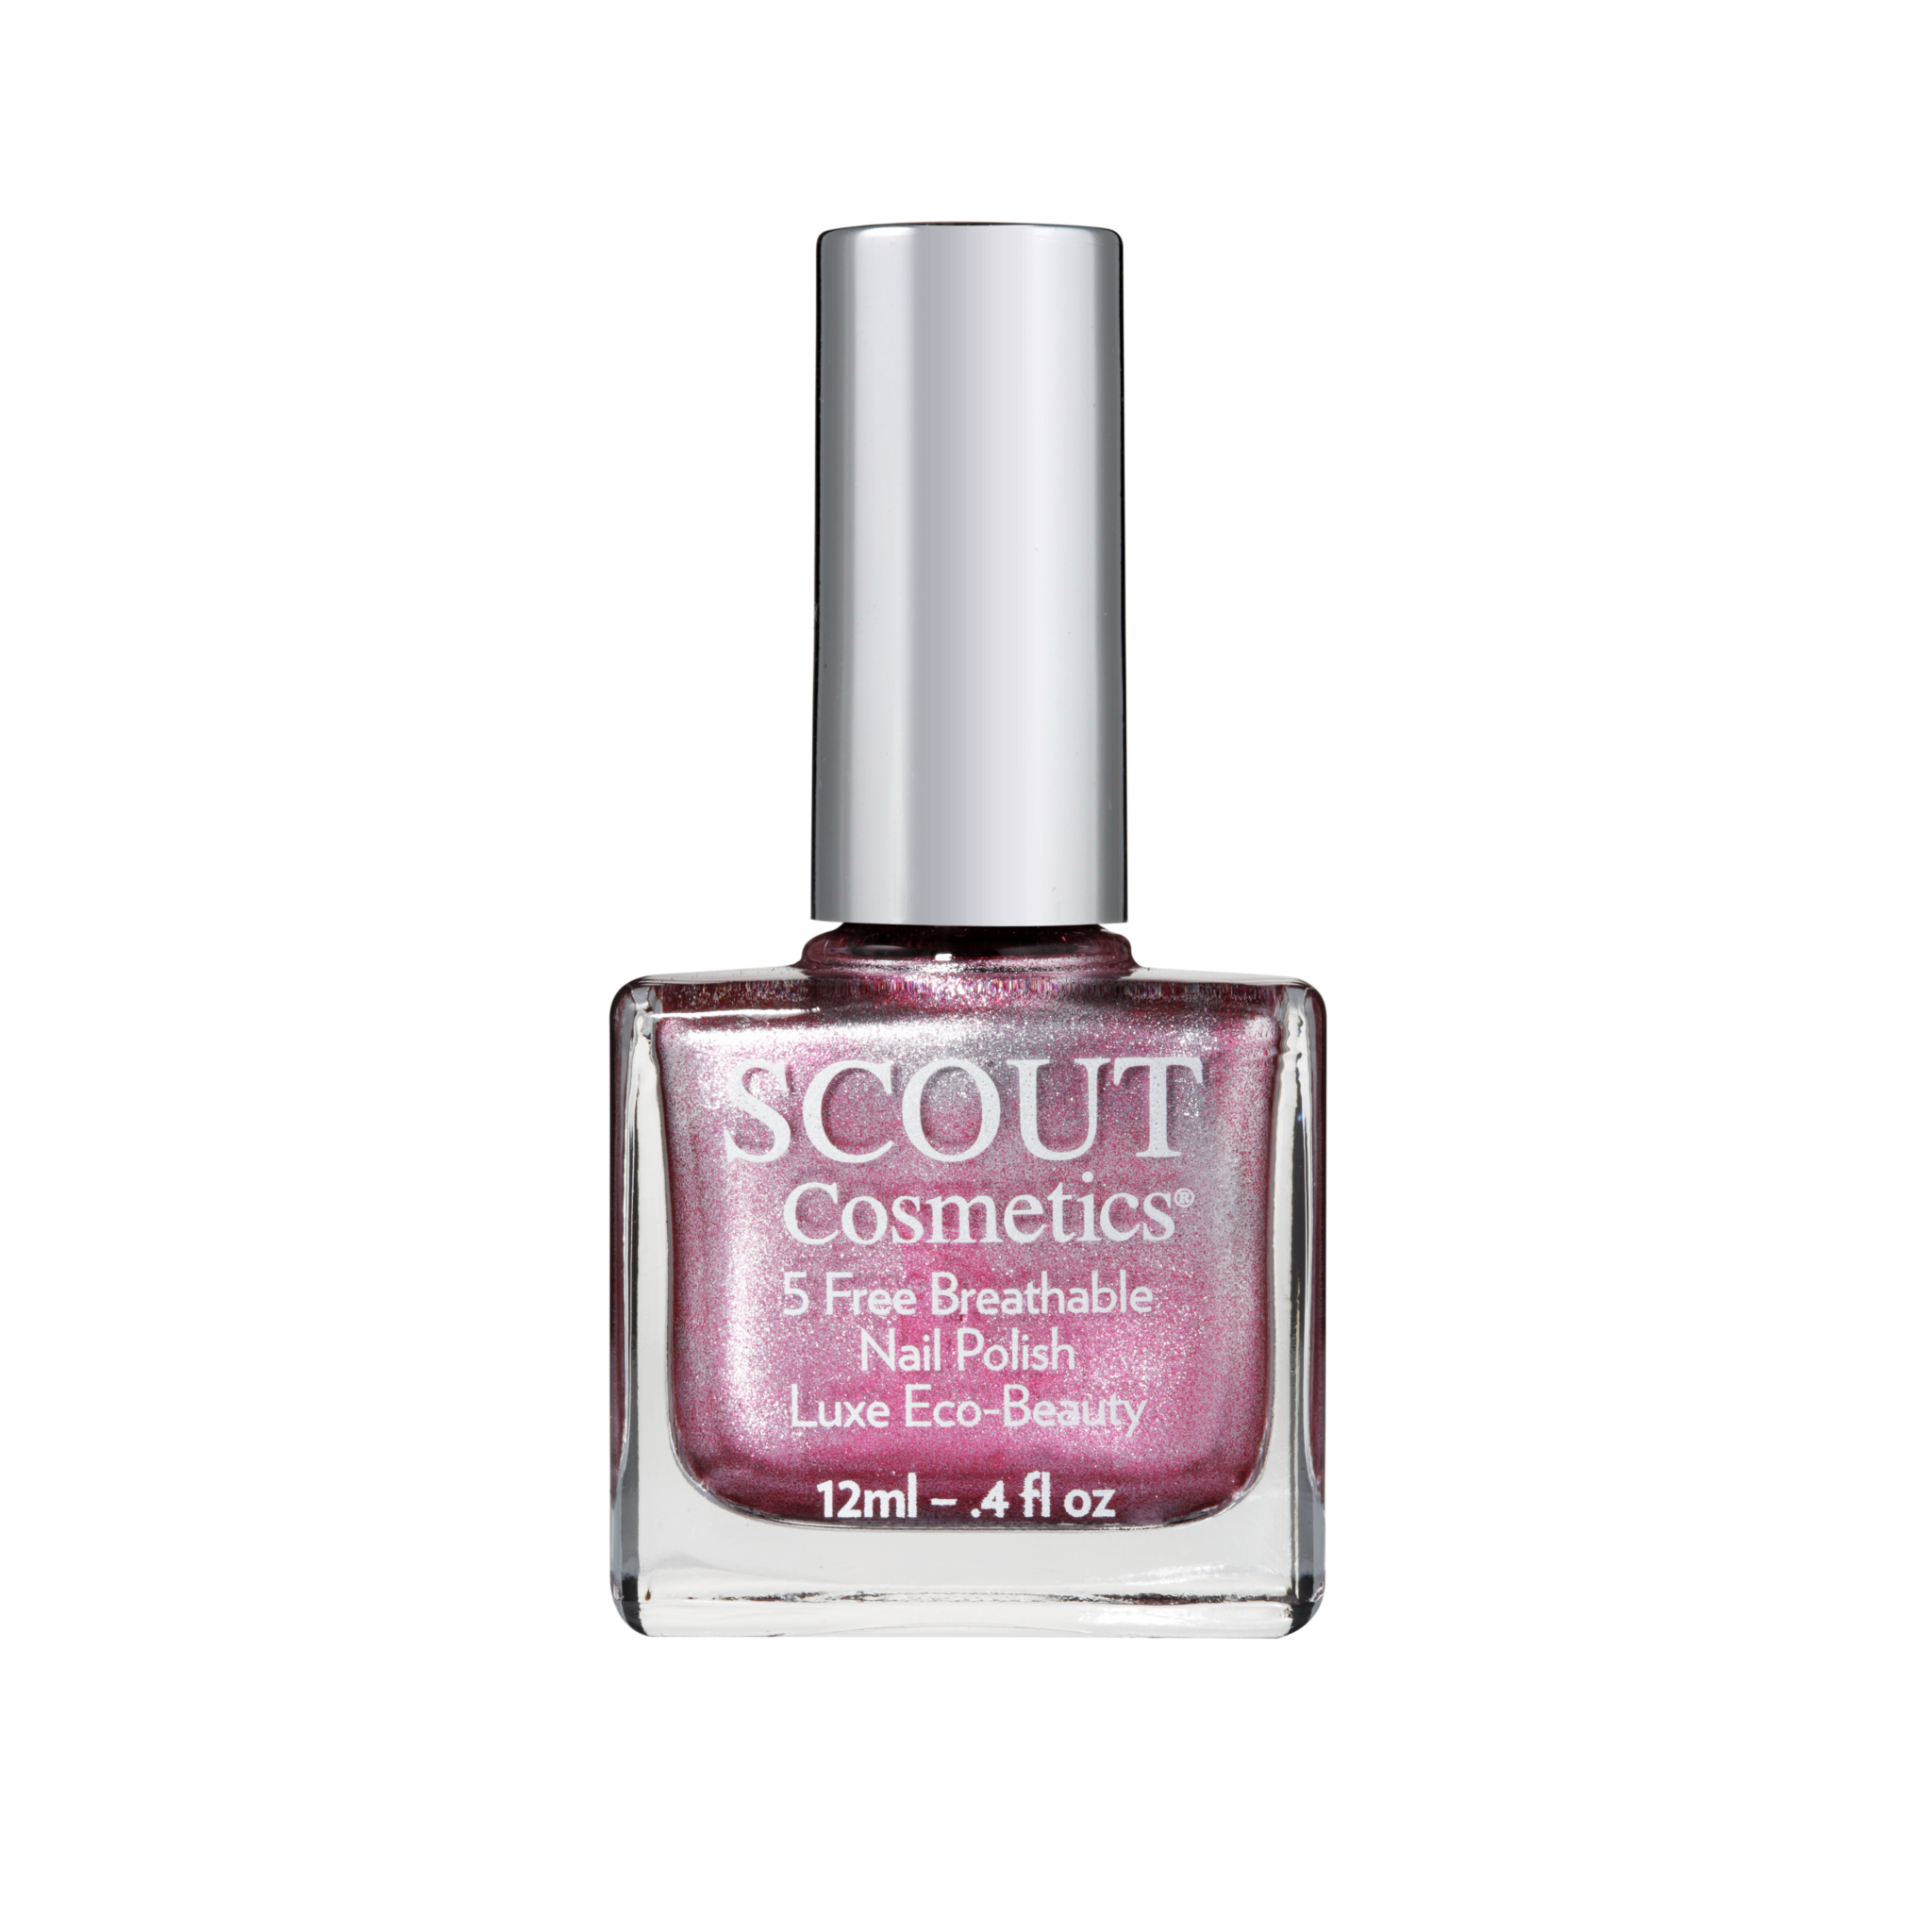 SCOUT Cosmetics Nail Polish - All She Desires